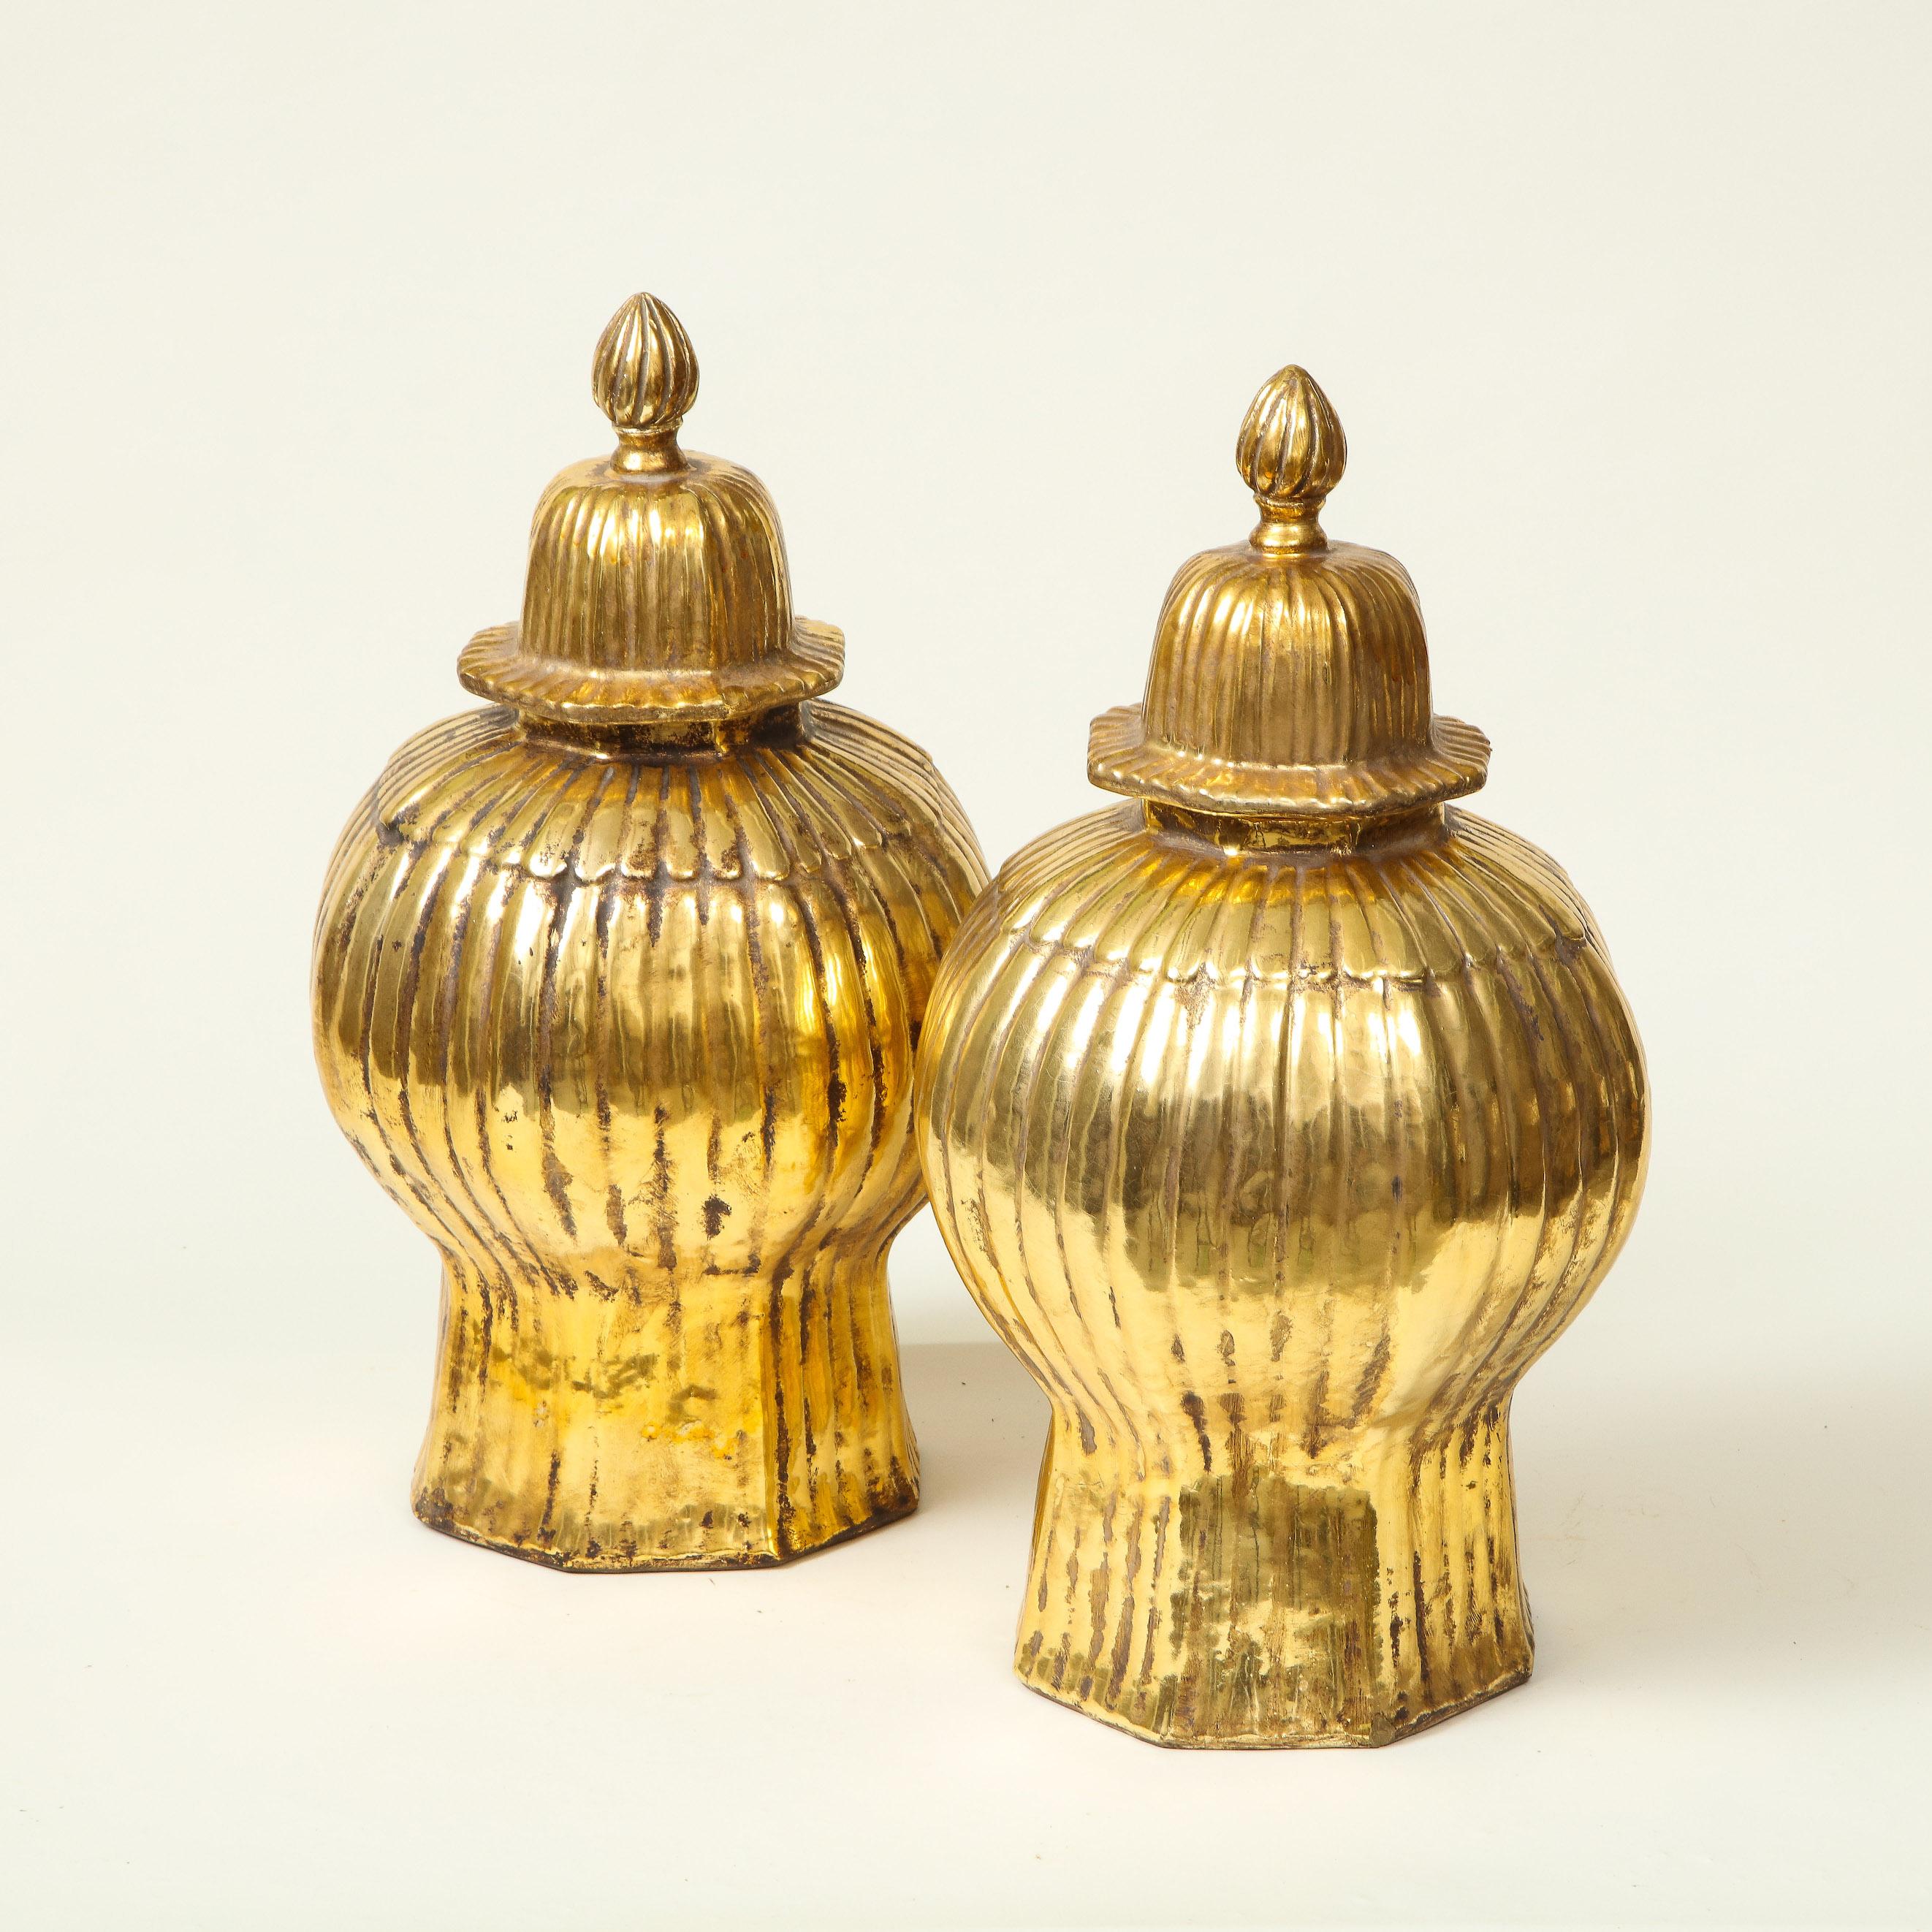 Of baluster form; each lid surmounted by a knop finial.

Provenance: From the Collection of Mario Buatta, New York, NY.